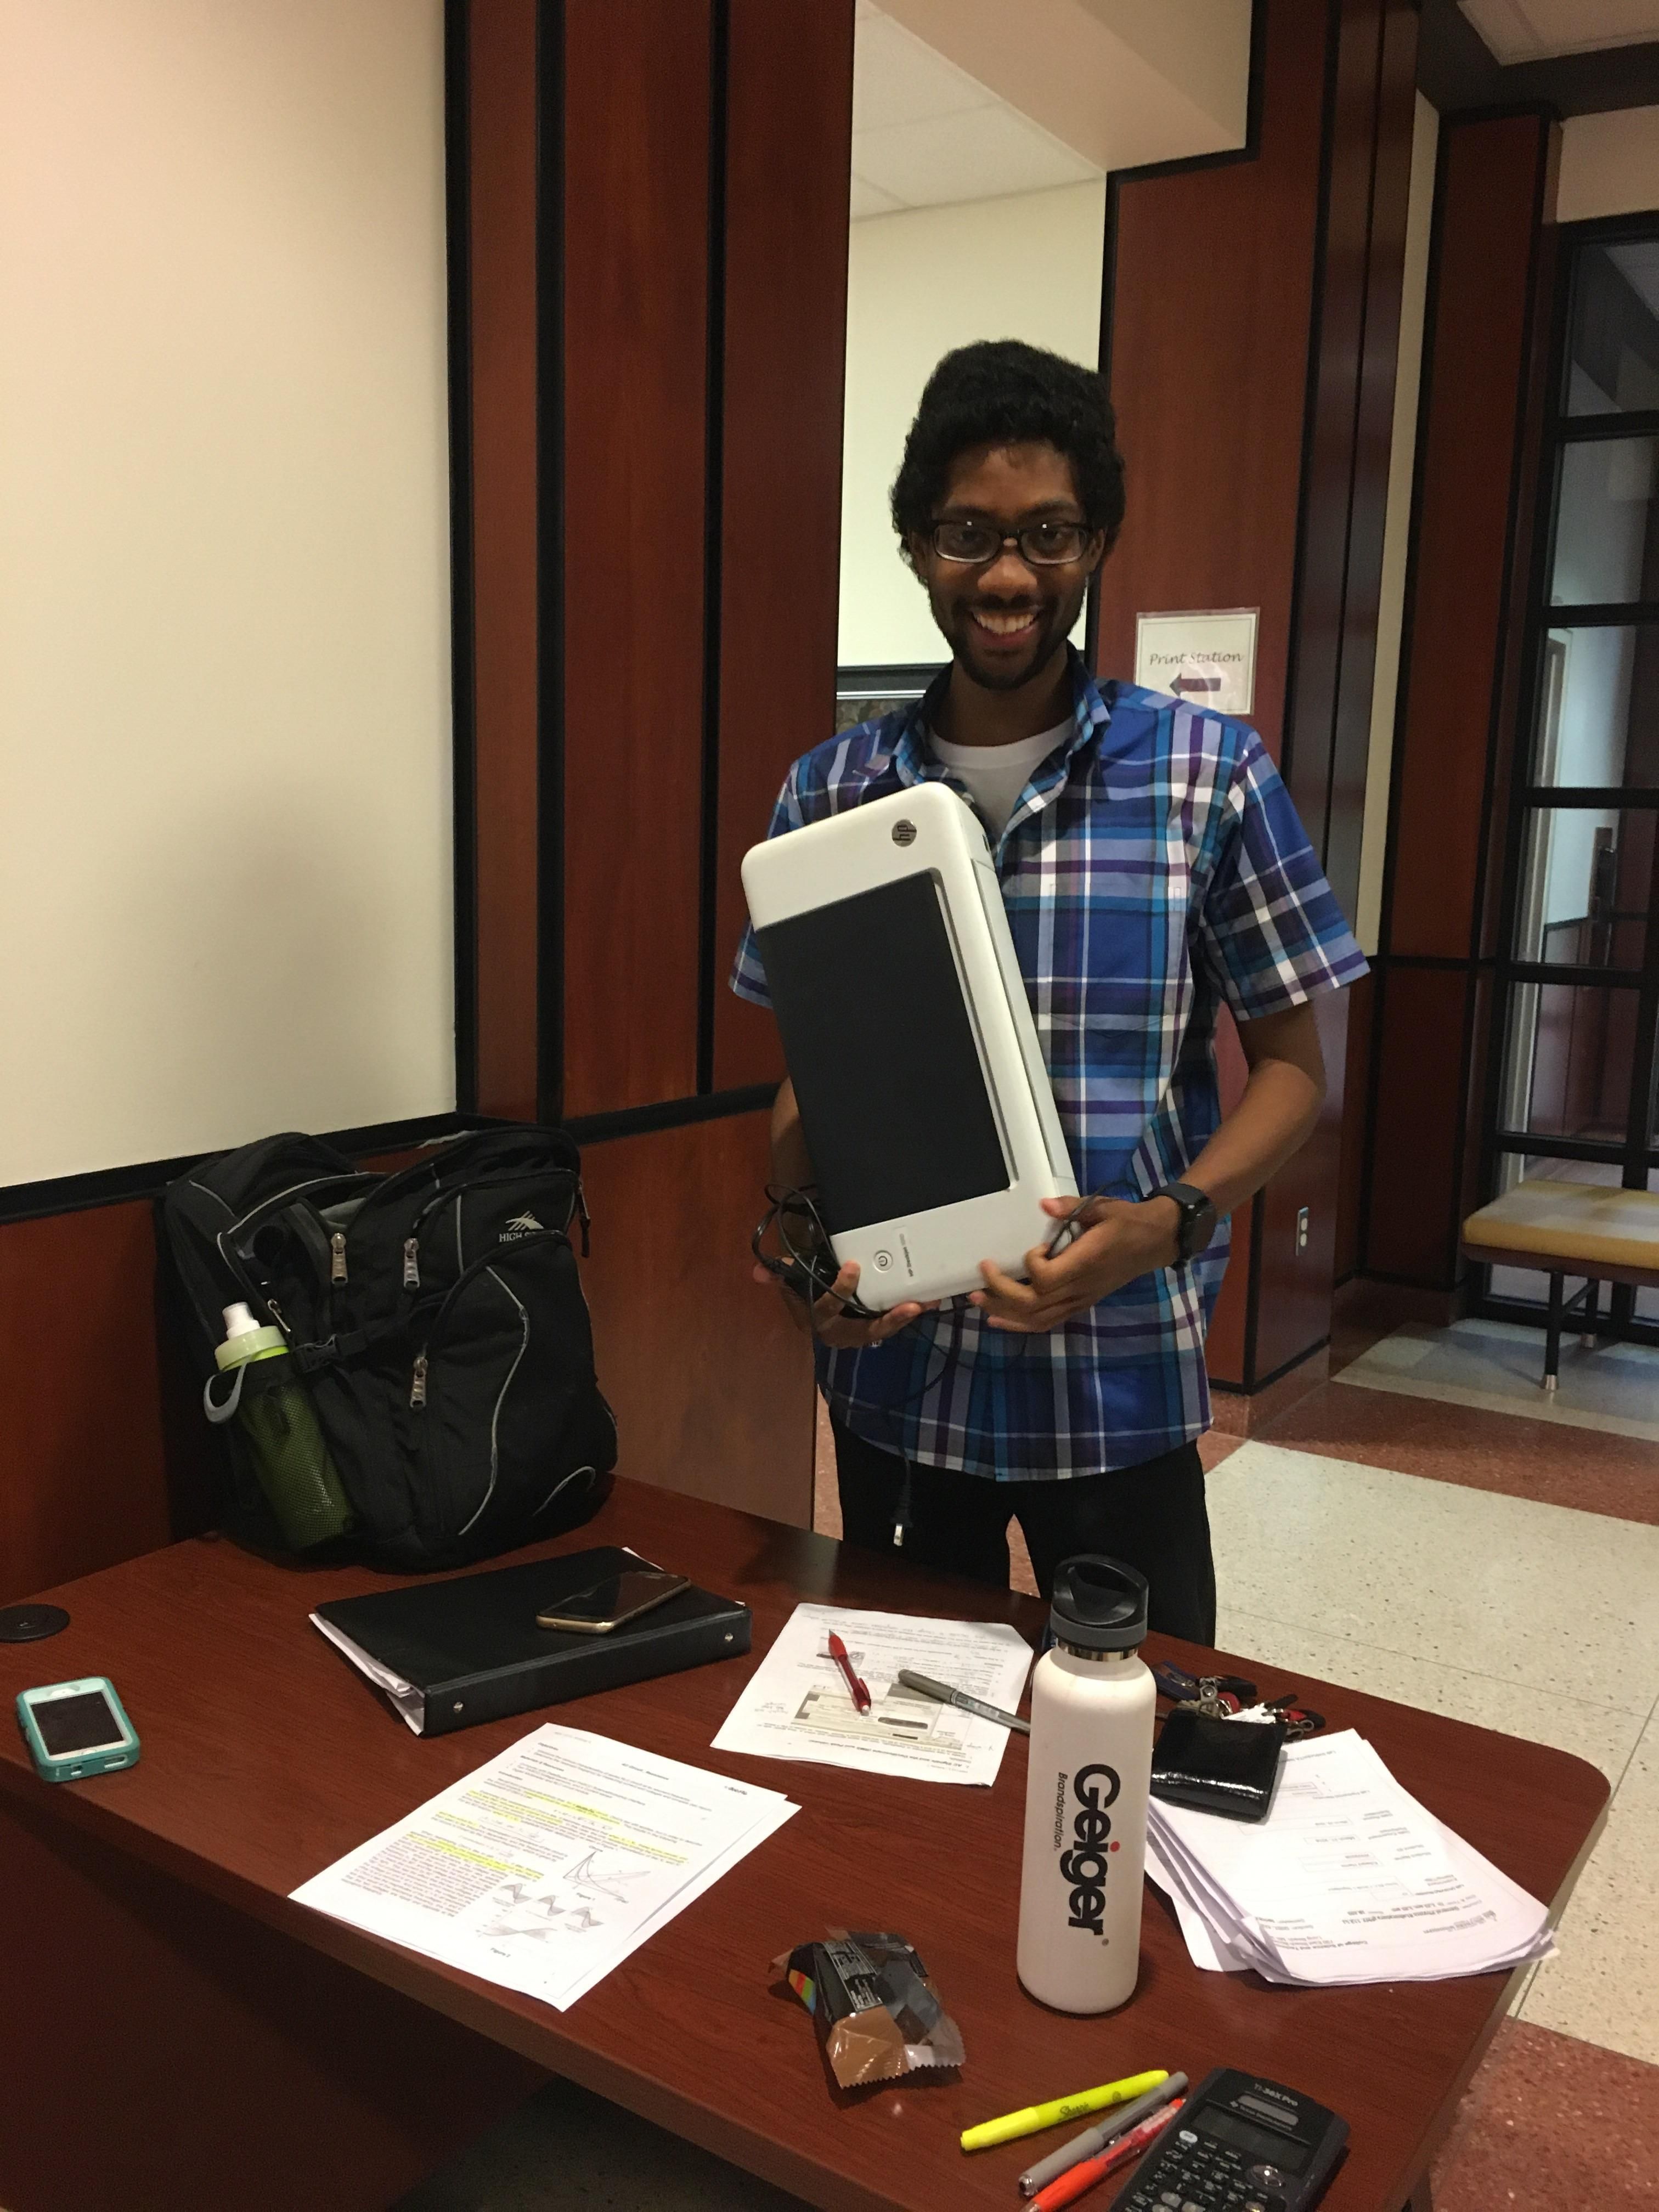 Dude pulled pulled a printer out of his backpack so he didn’t have to pay to use the university’s print station